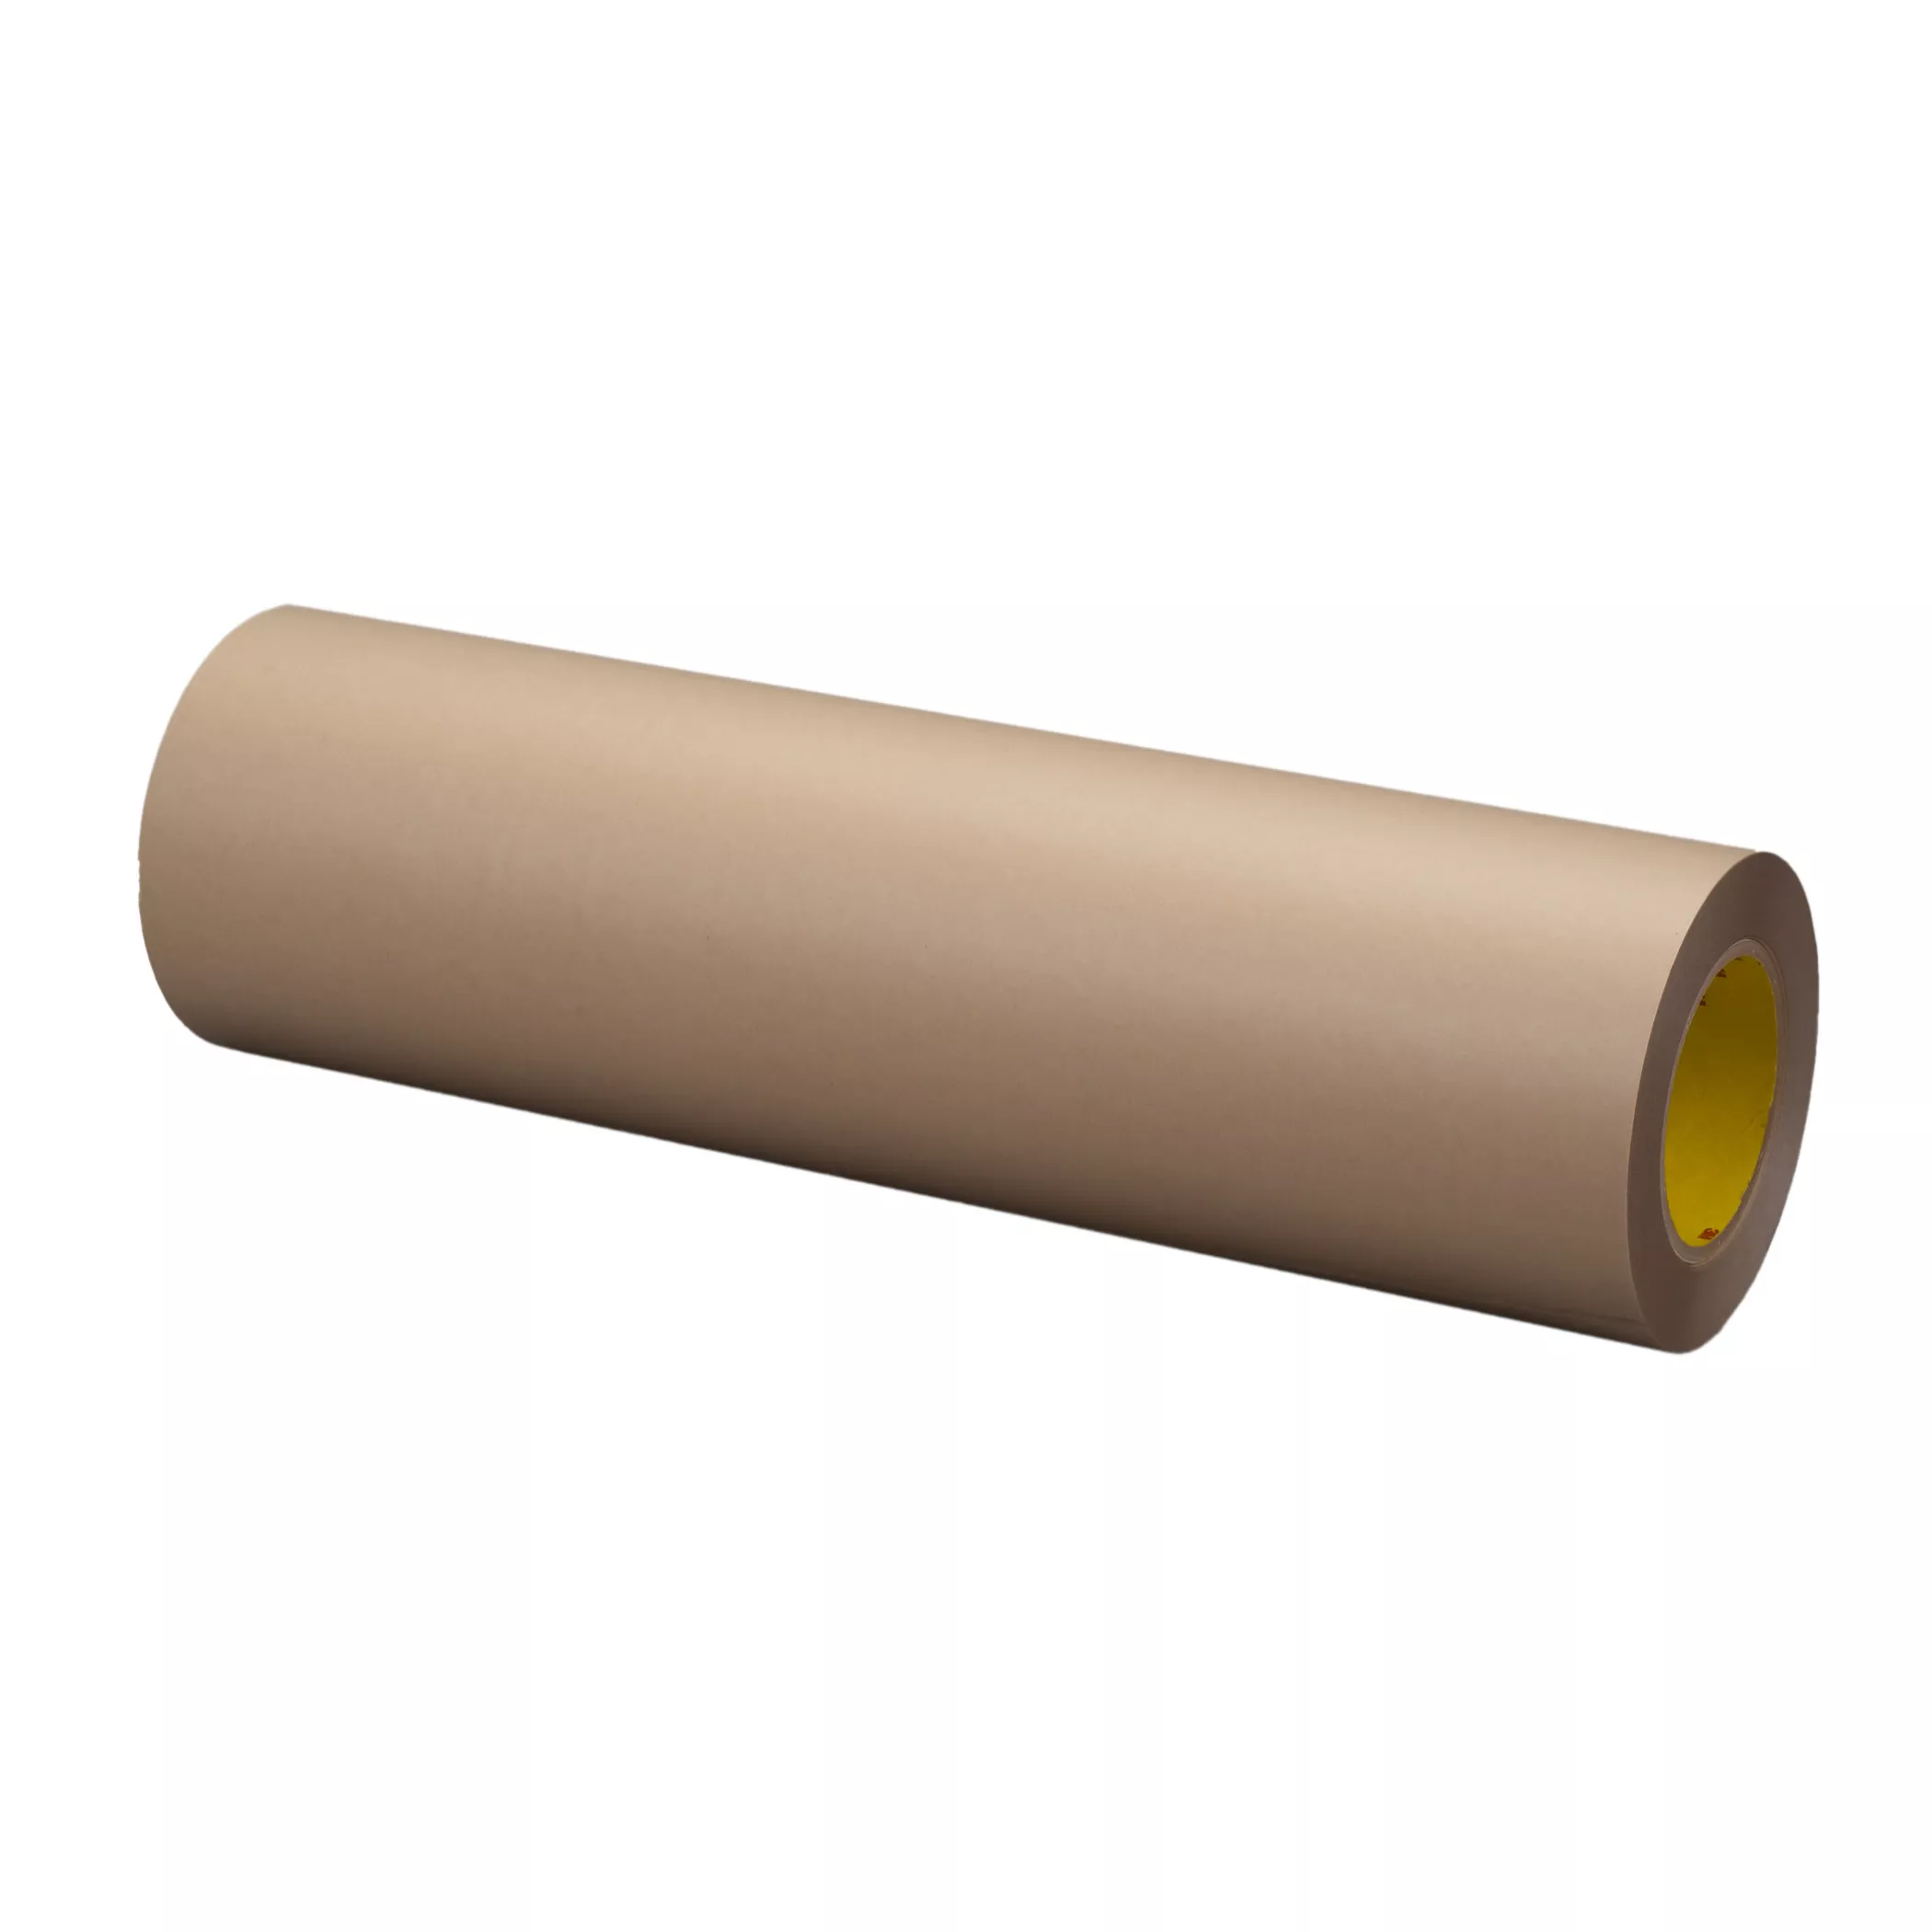 3M™ Thin Flexographic Plate Mounting Tape E2105, Translucent, 27 in x 36
yd, 5 mil, 1 Roll/Case